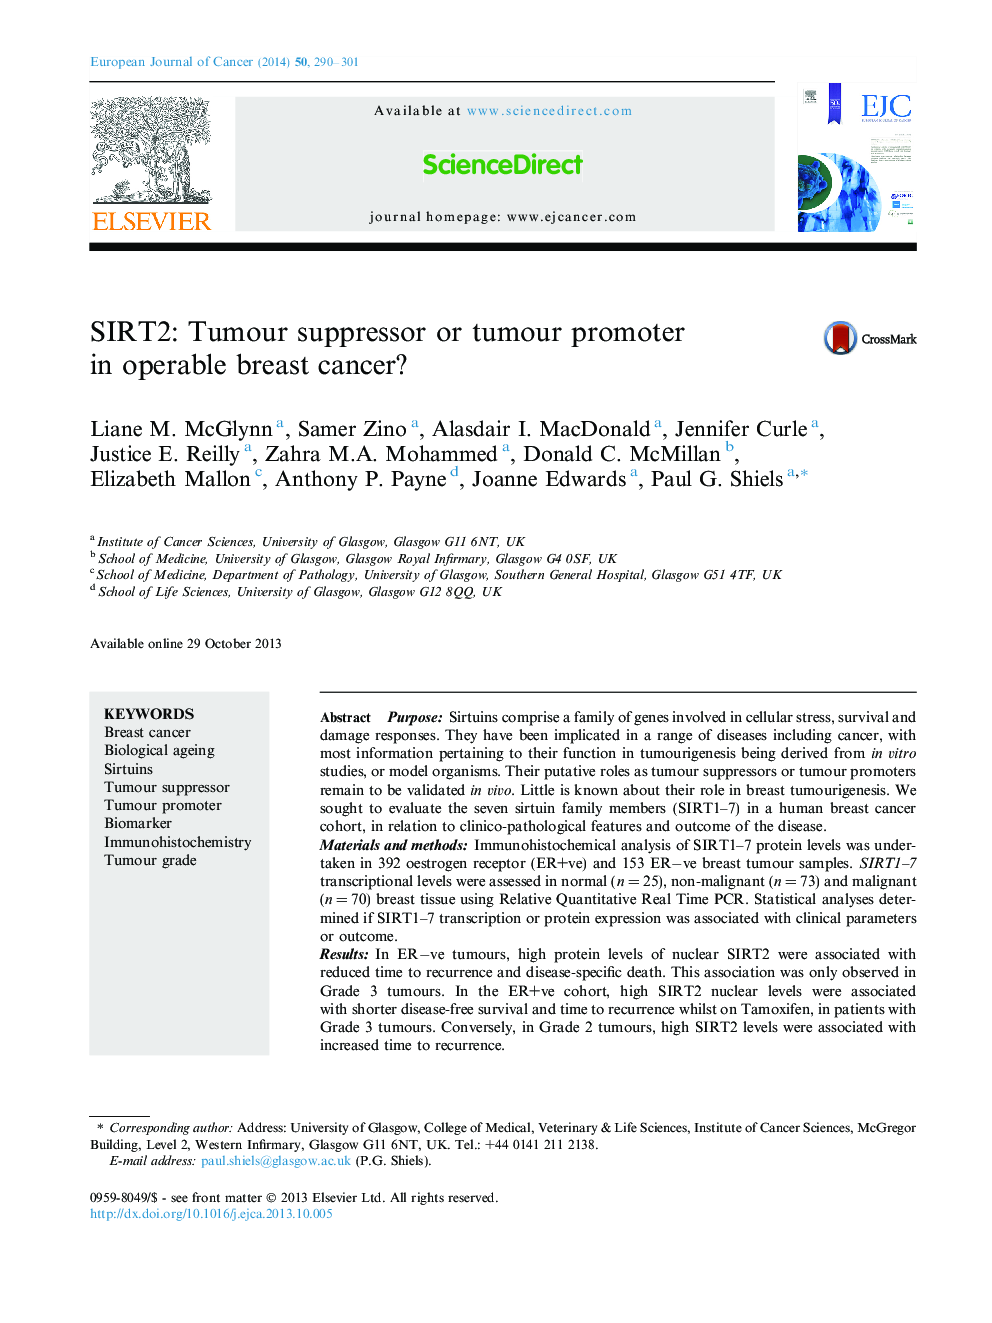 SIRT2: Tumour suppressor or tumour promoter in operable breast cancer?